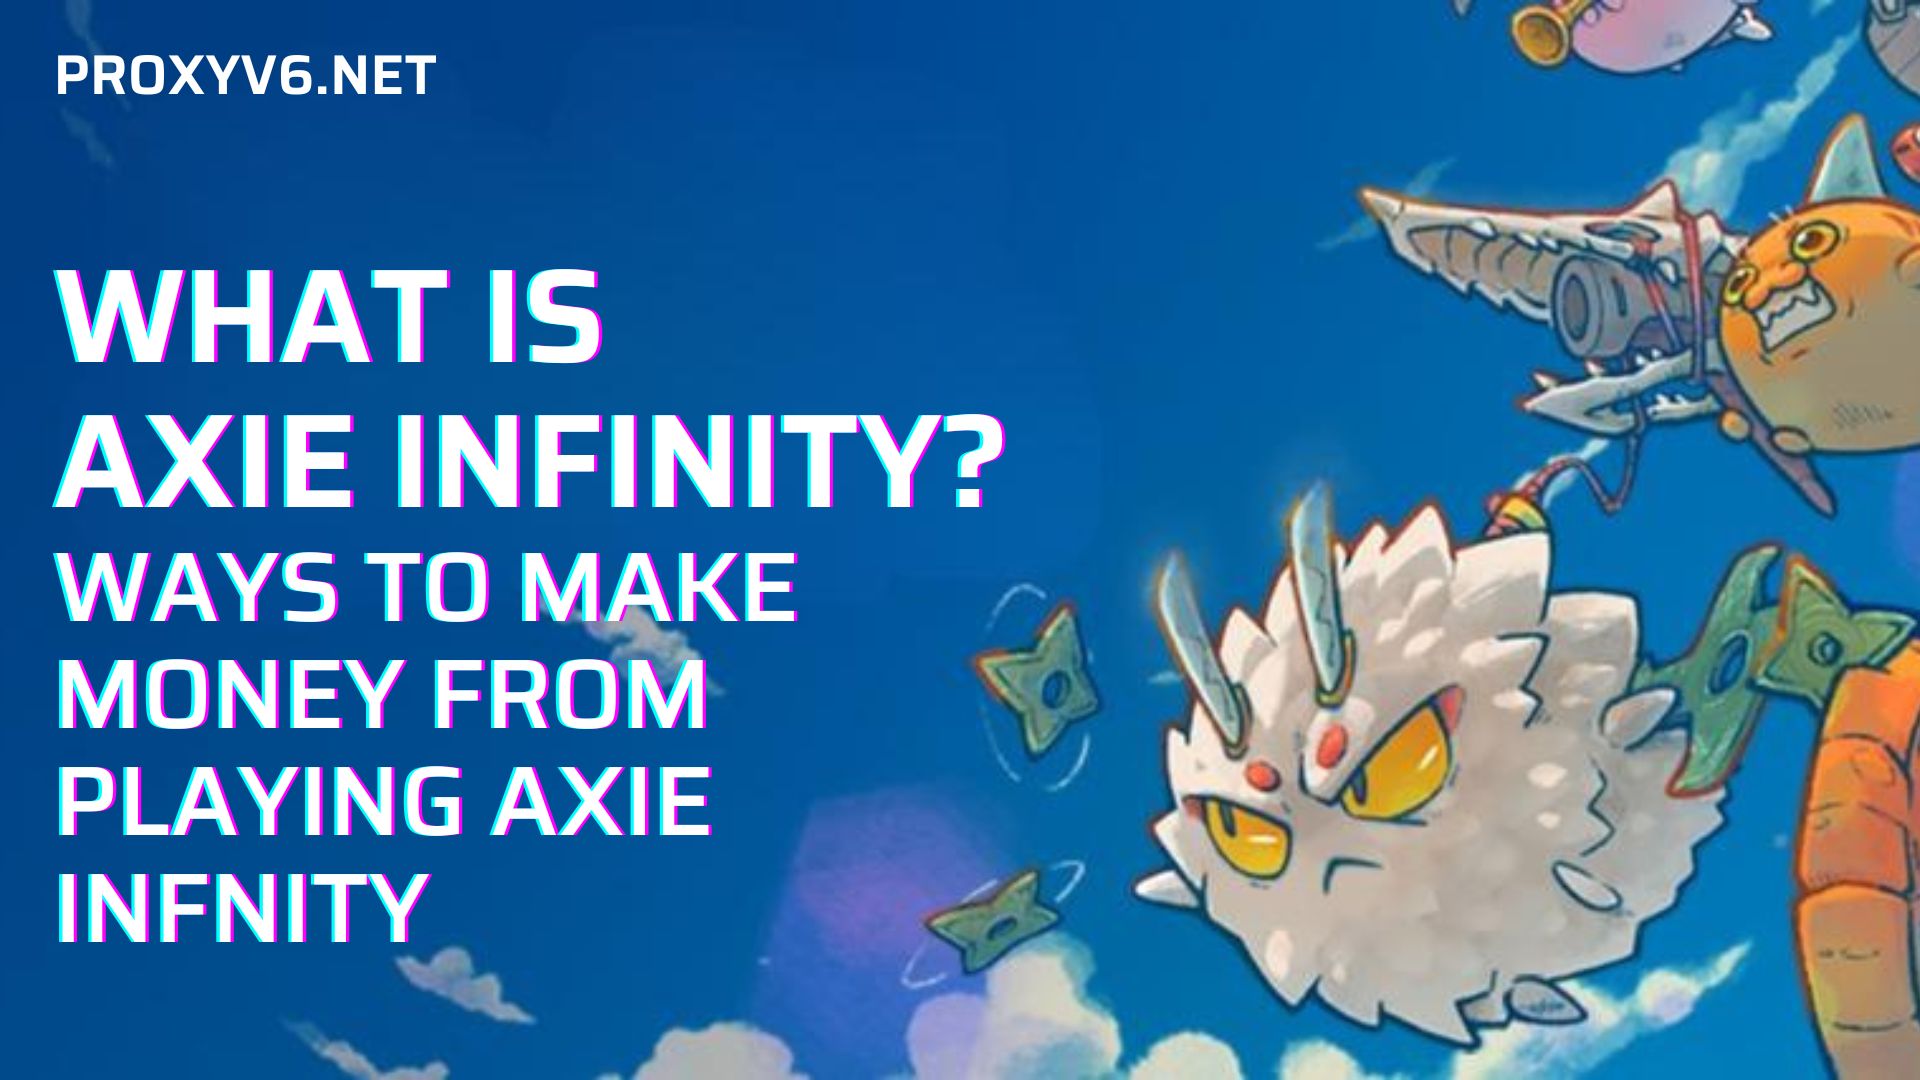 What is Axie Infinity? Ways to make money from playing Axie Infinity